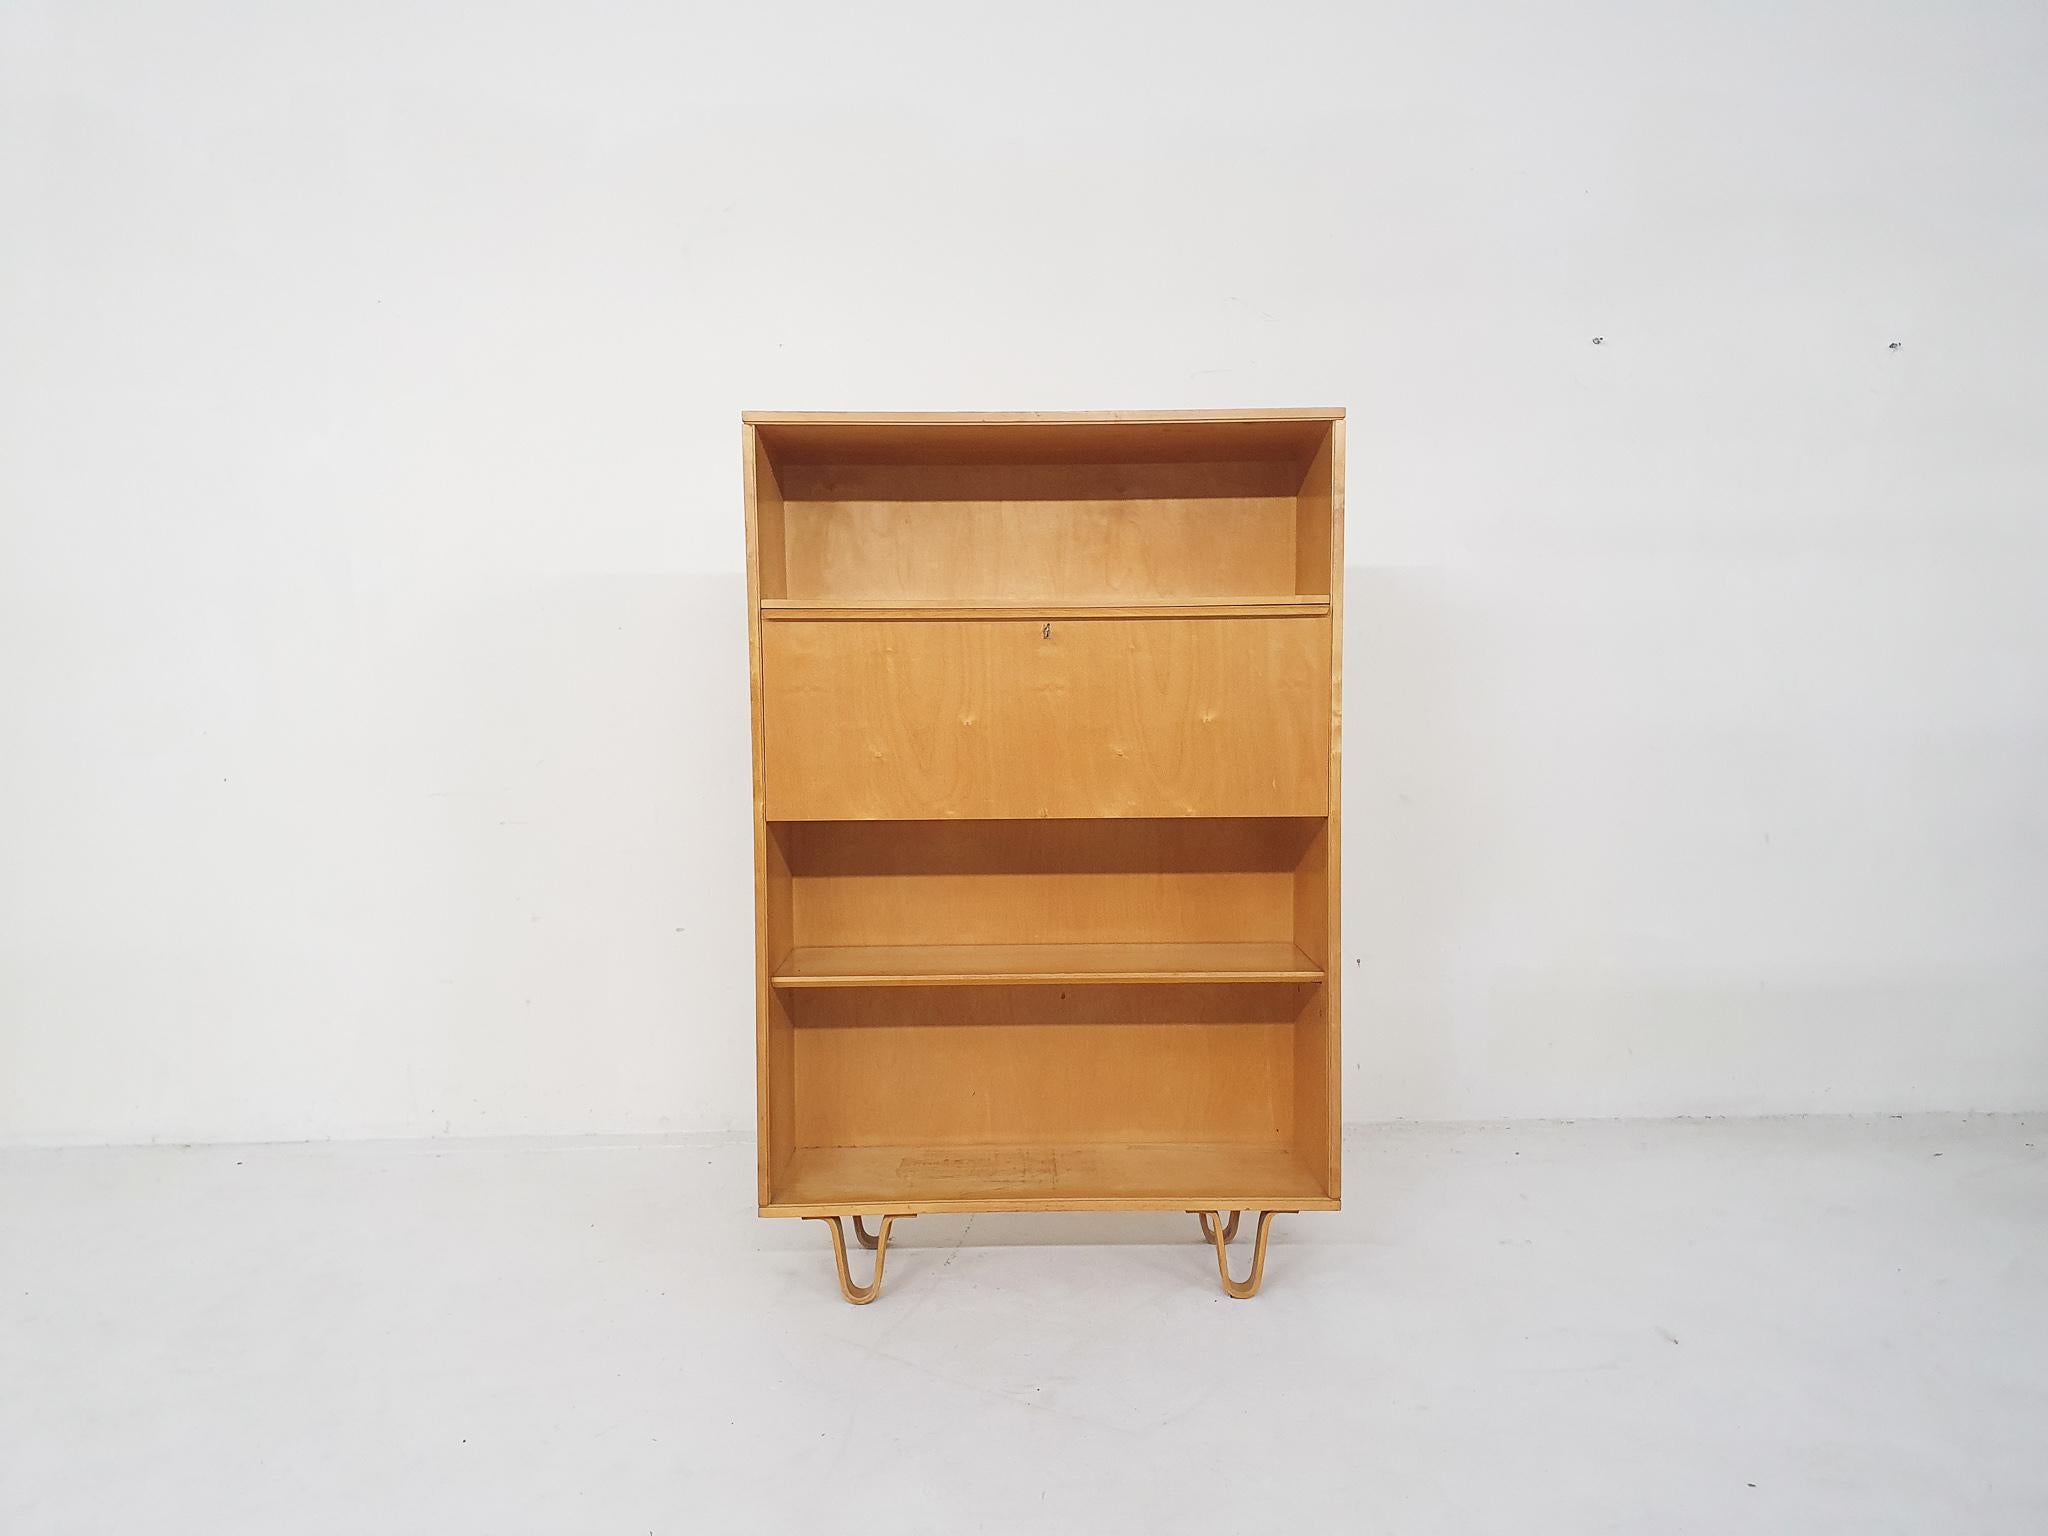 Birch book case model BB04 designed by Cees Braakman for Pastoe in 1952.
The valve can also be used as a desk.
The surface and one side of the cabinet have been sand and polished.
Some traces of use on the shelves.

Cees Braakman
Cees Braakman was a